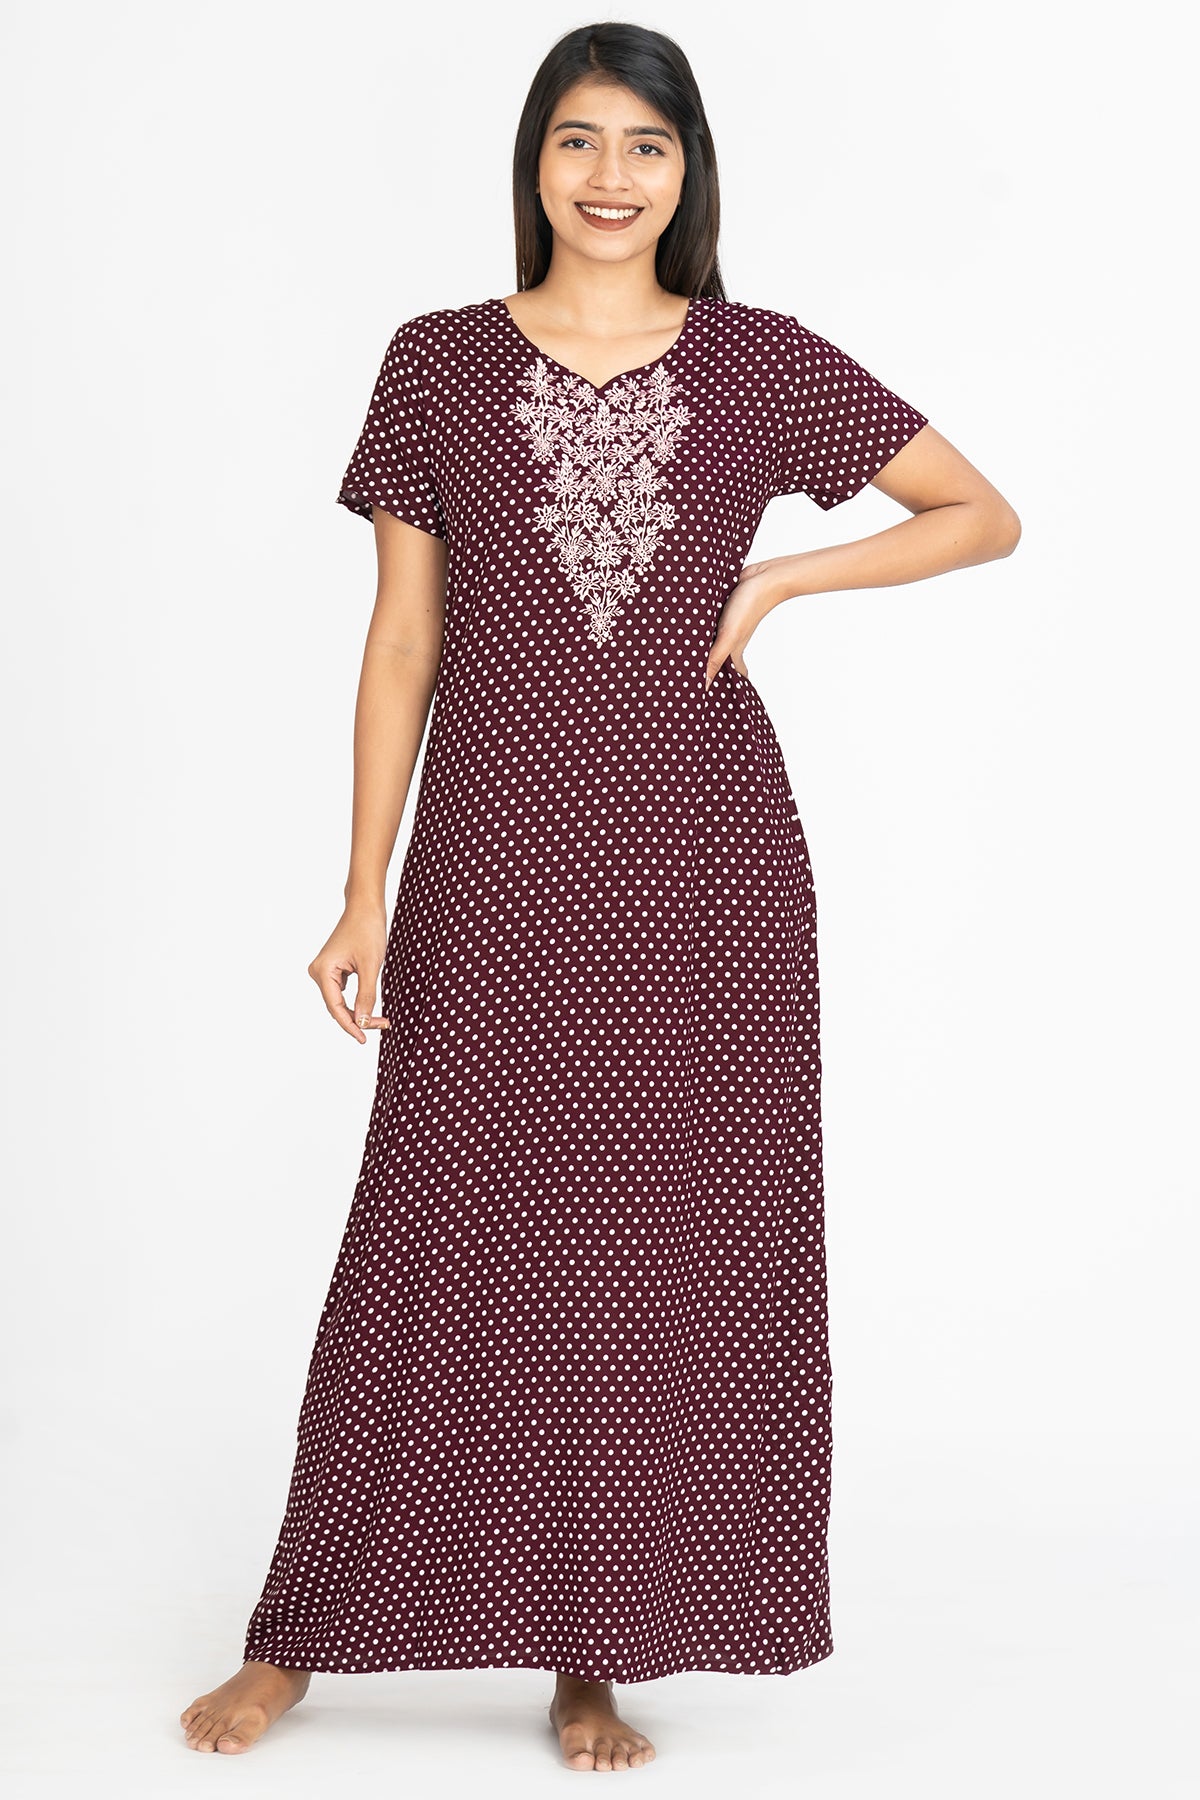 All Over Polka Dot Print With Contrast Floral Embroidered Yoke Nighty - Purple